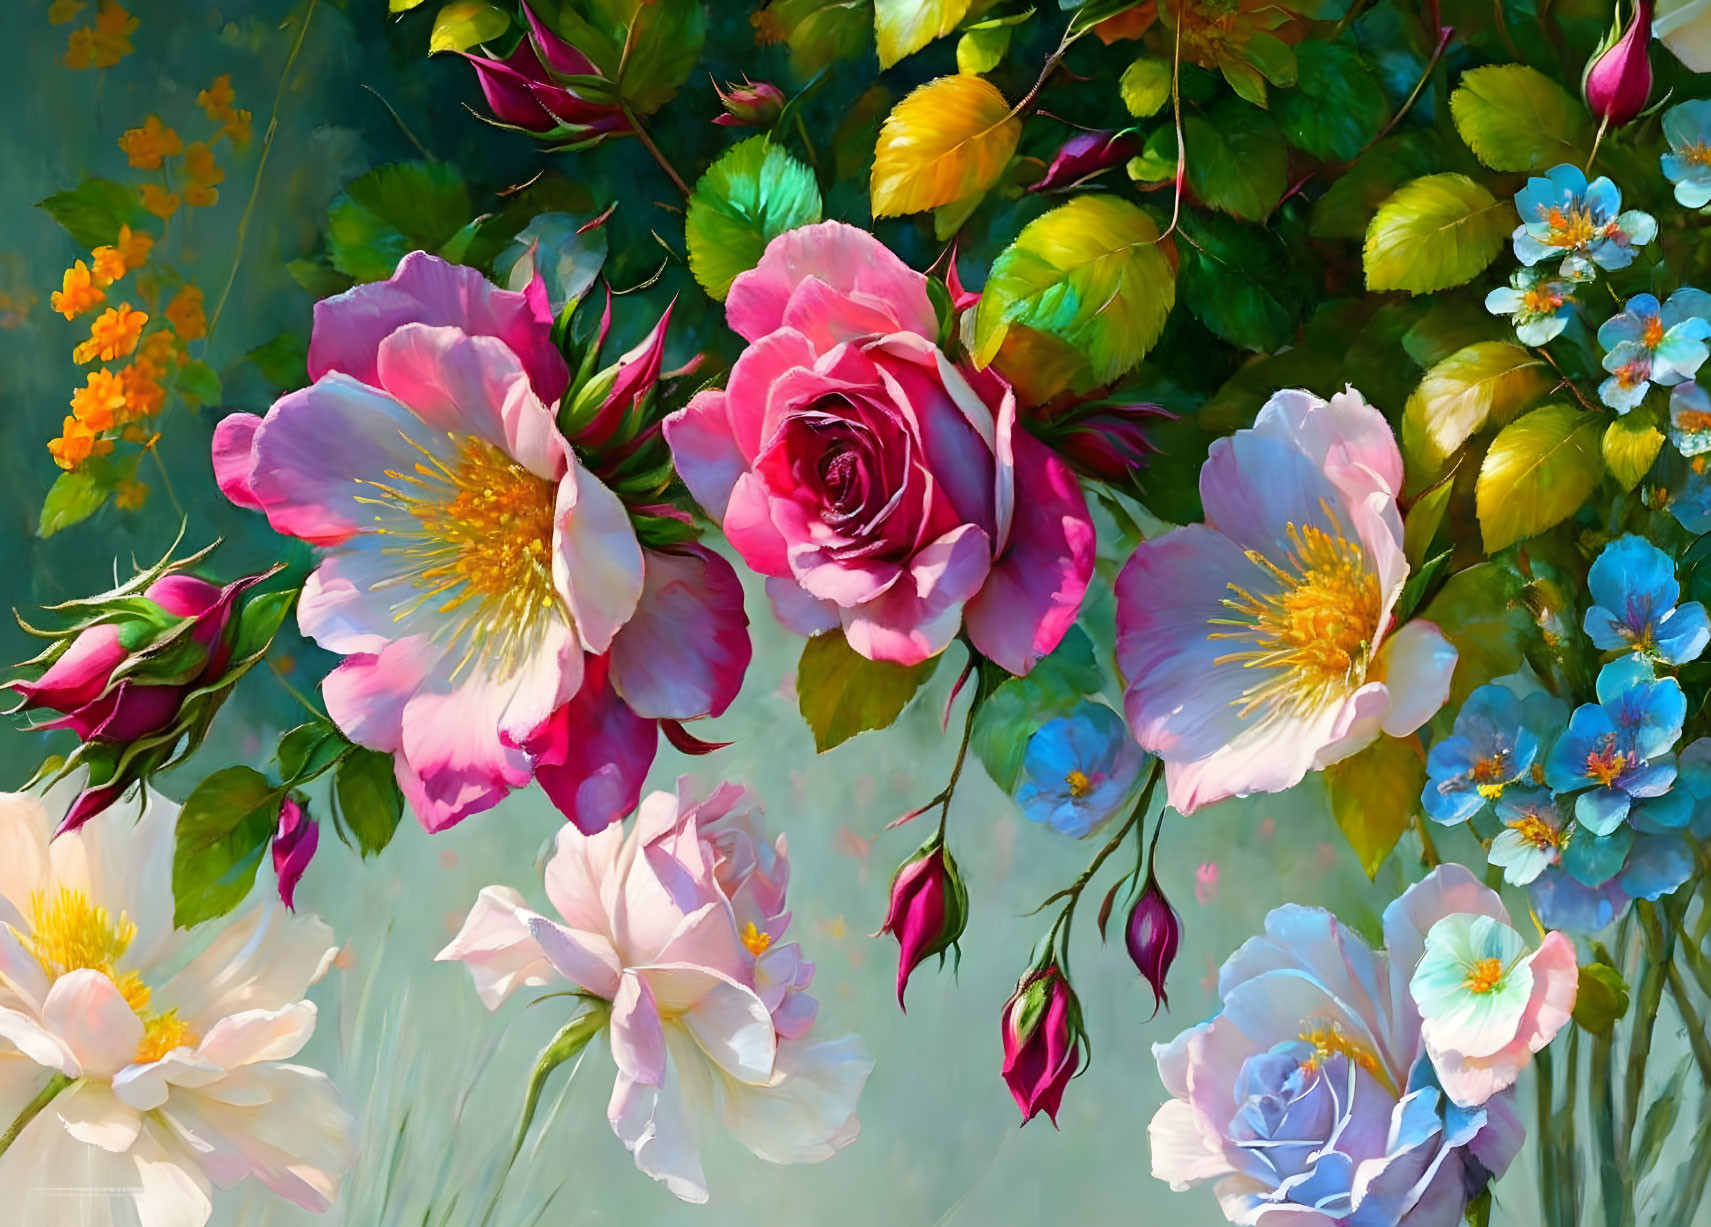 Colorful Floral Painting with Roses and Blossoms in Lush Greenery